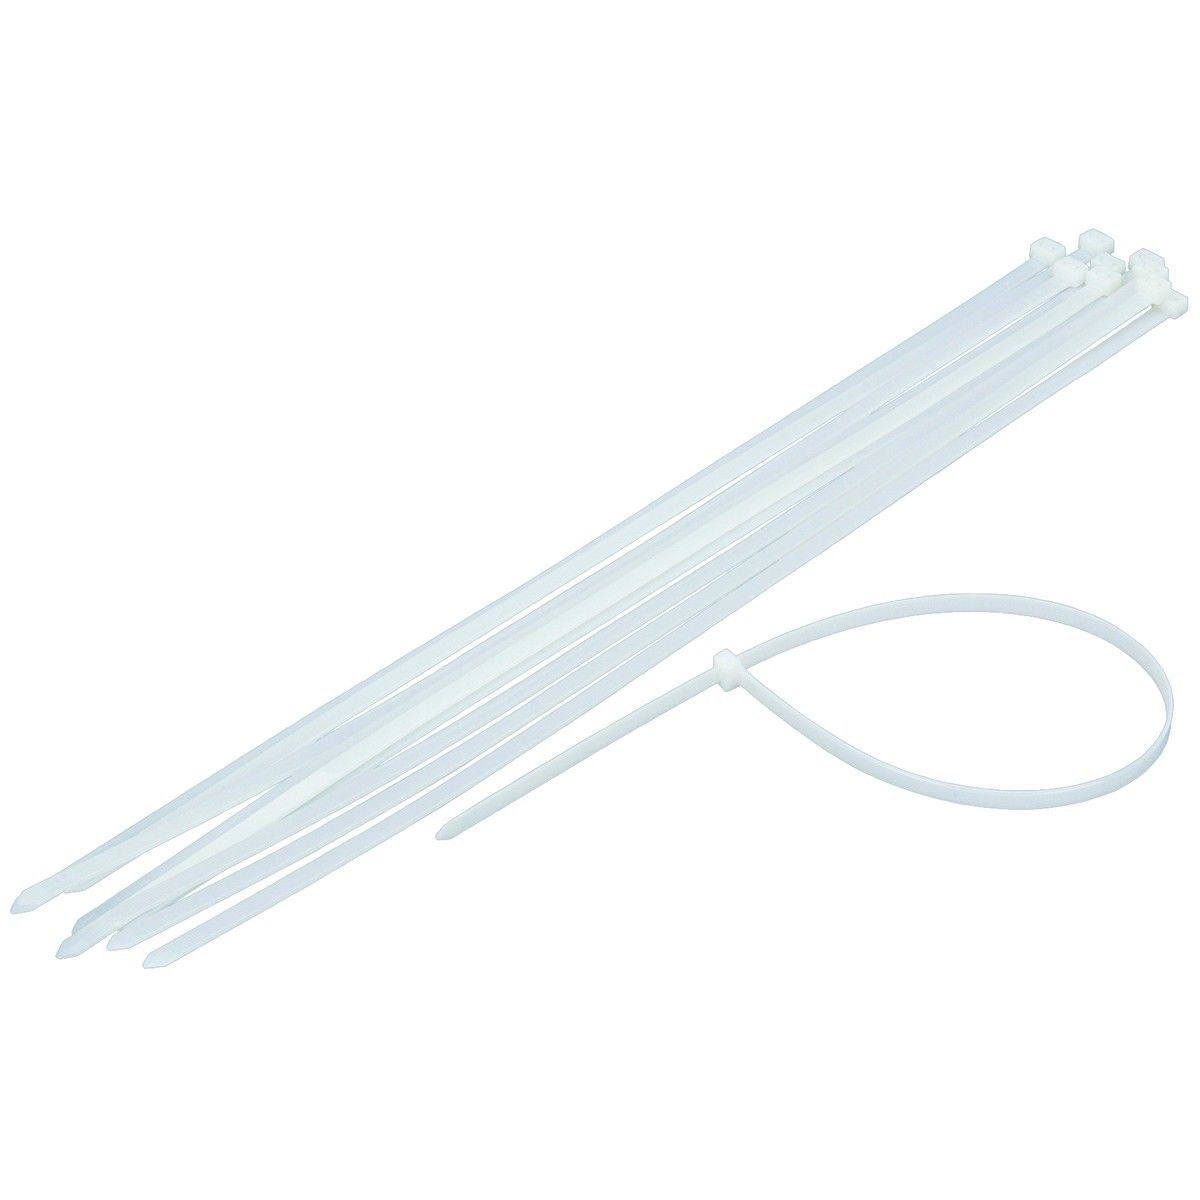 White Nylon Cable Ties Zip Lock Ties 100 Pack Strong Plastic Heavy Duty